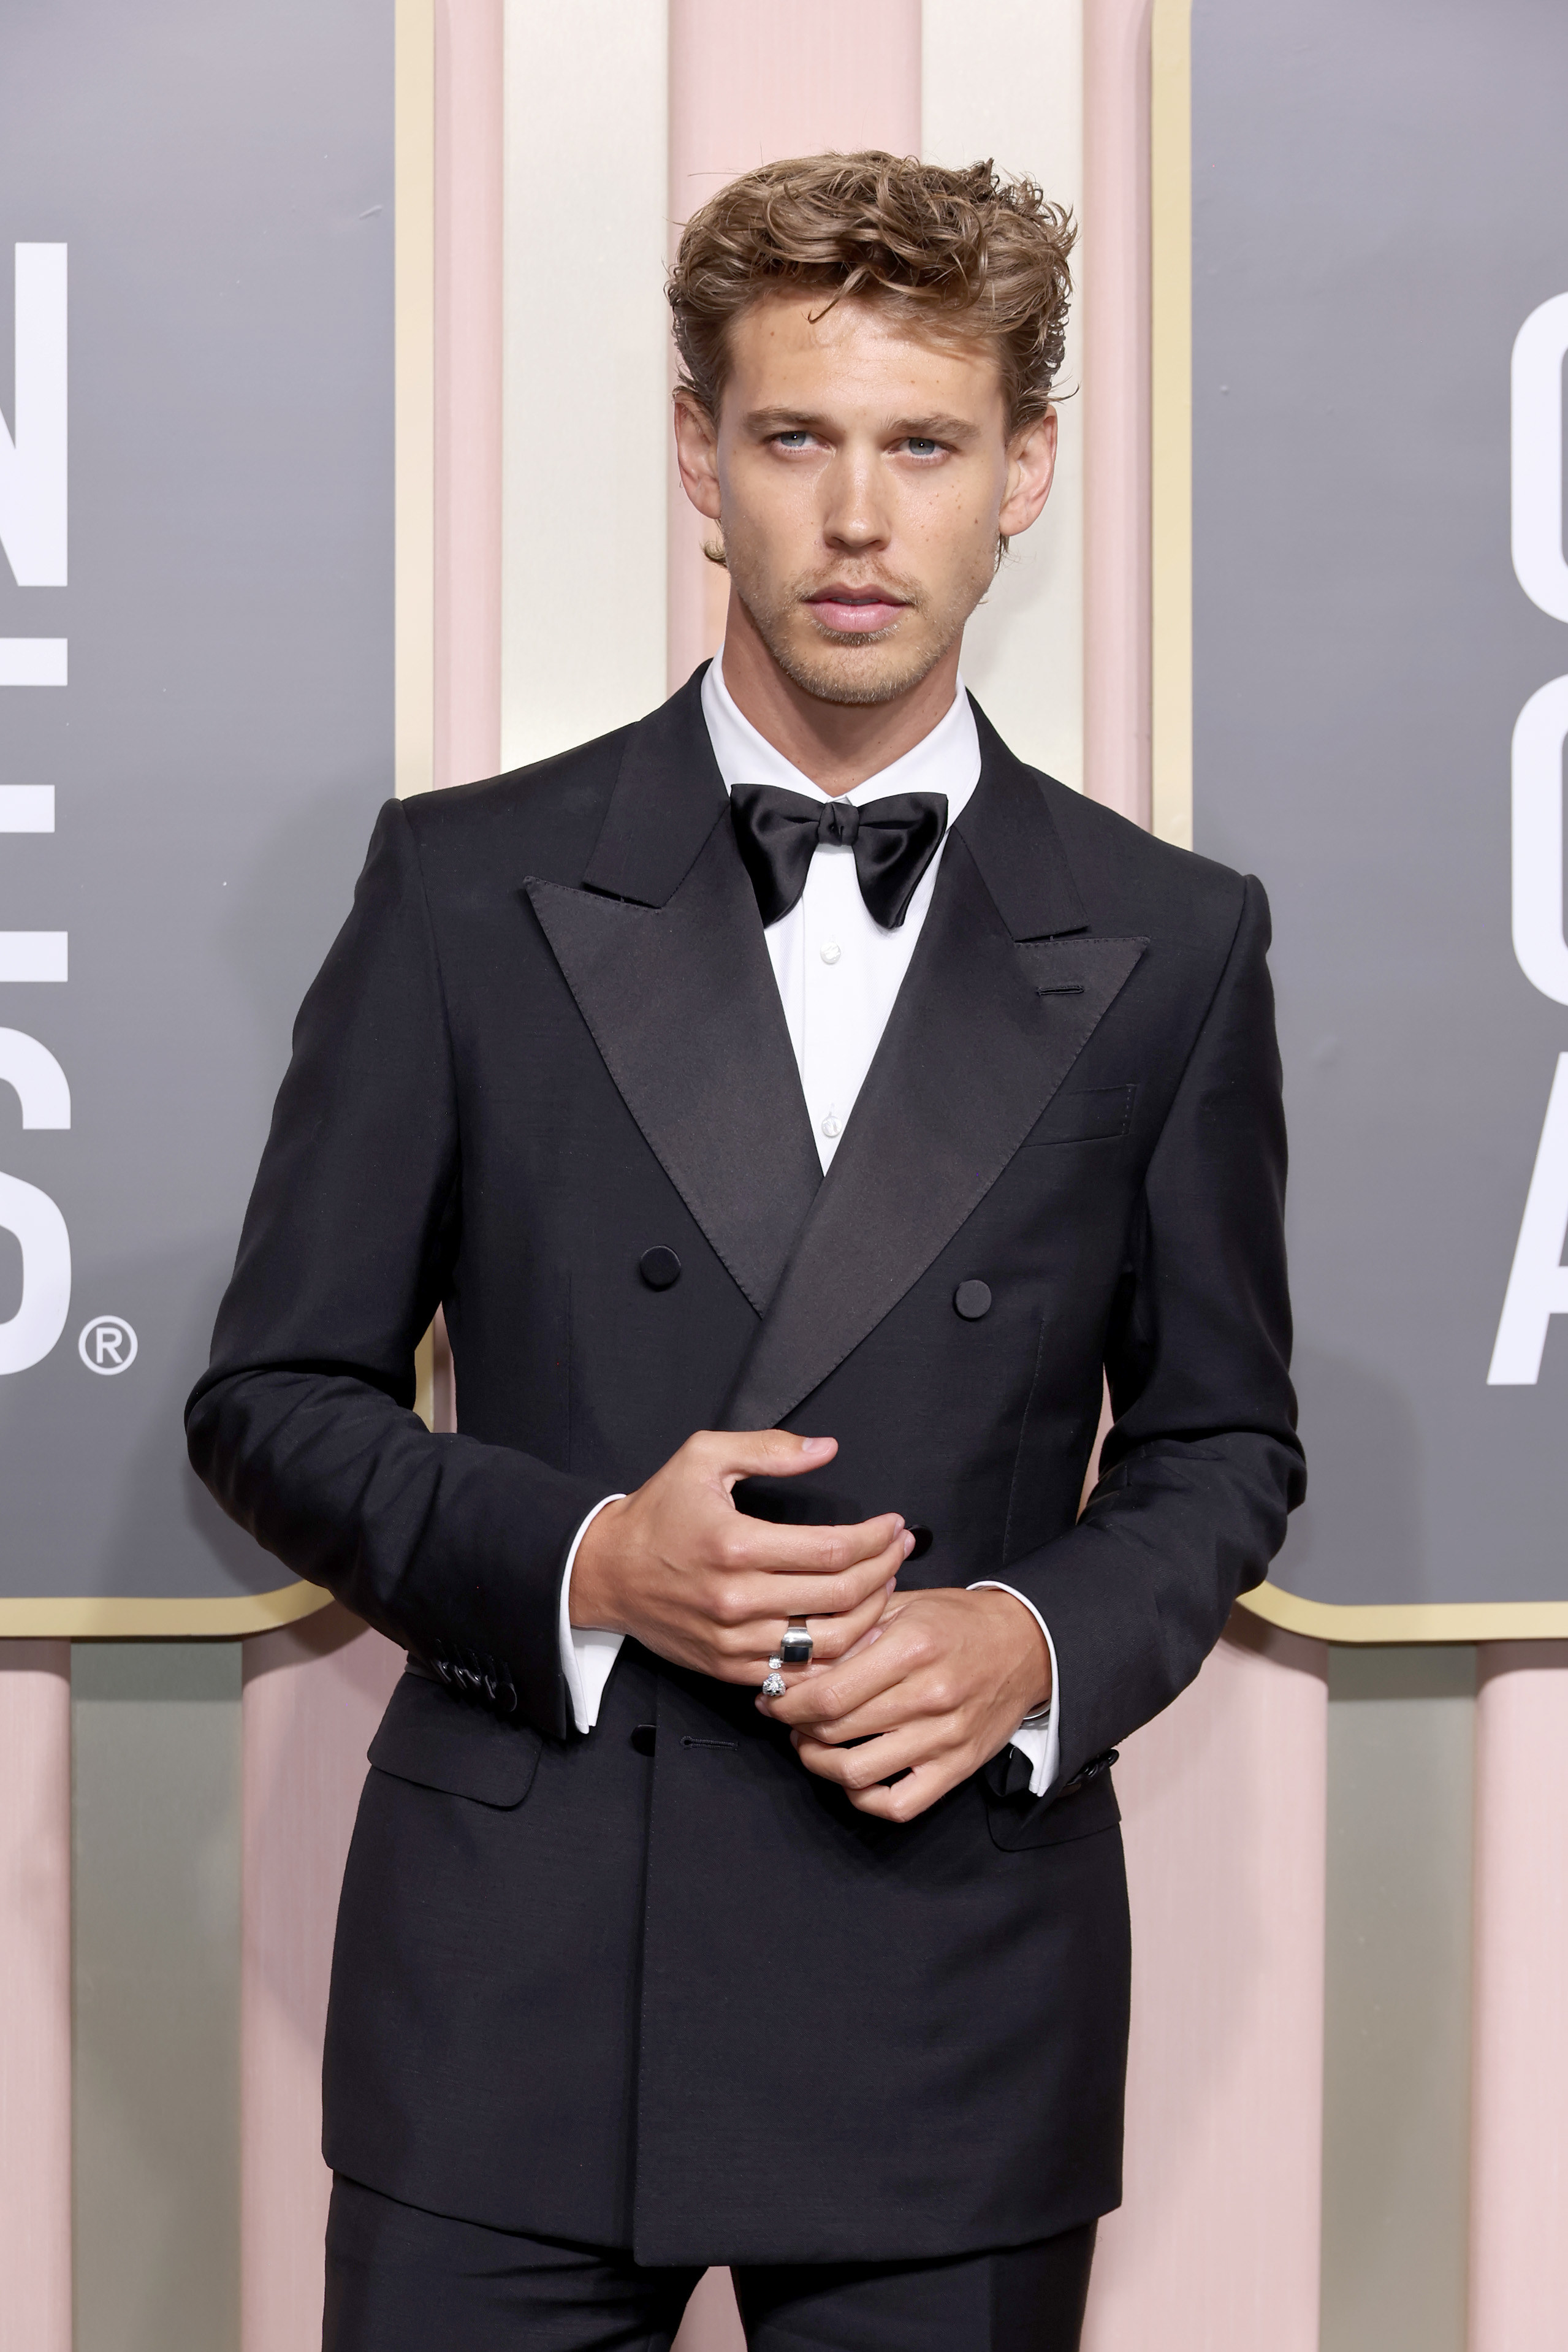 Austin in suit and bow tie stands for photographers on the Golden Globes red carpet